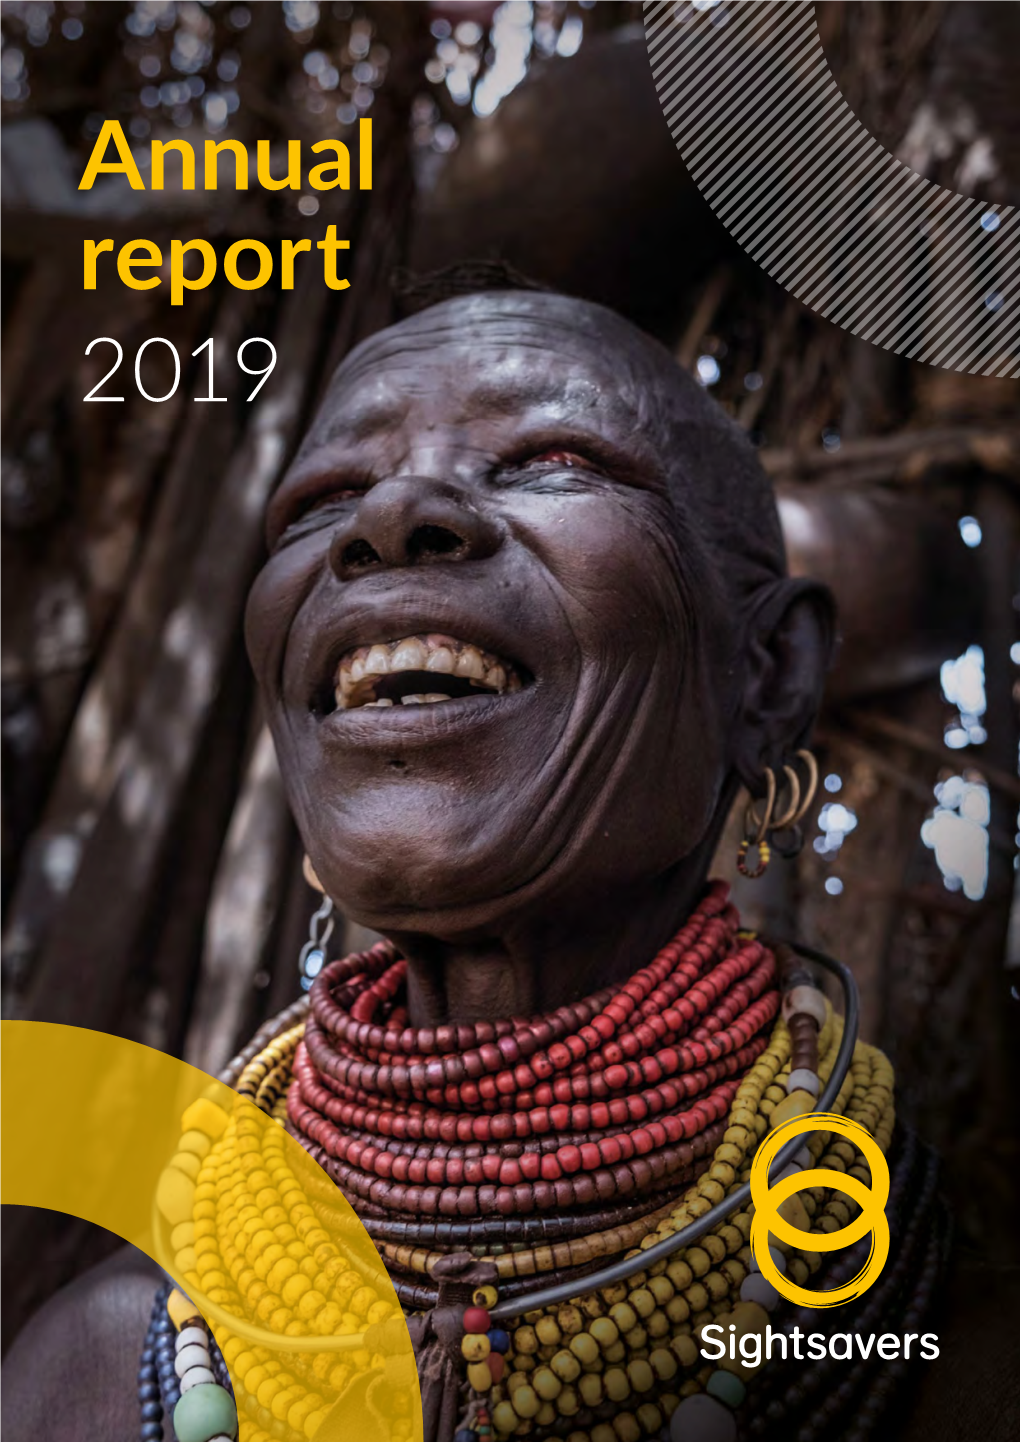 Annual Report 2019 © Sightsavers/Tommy Trenchard